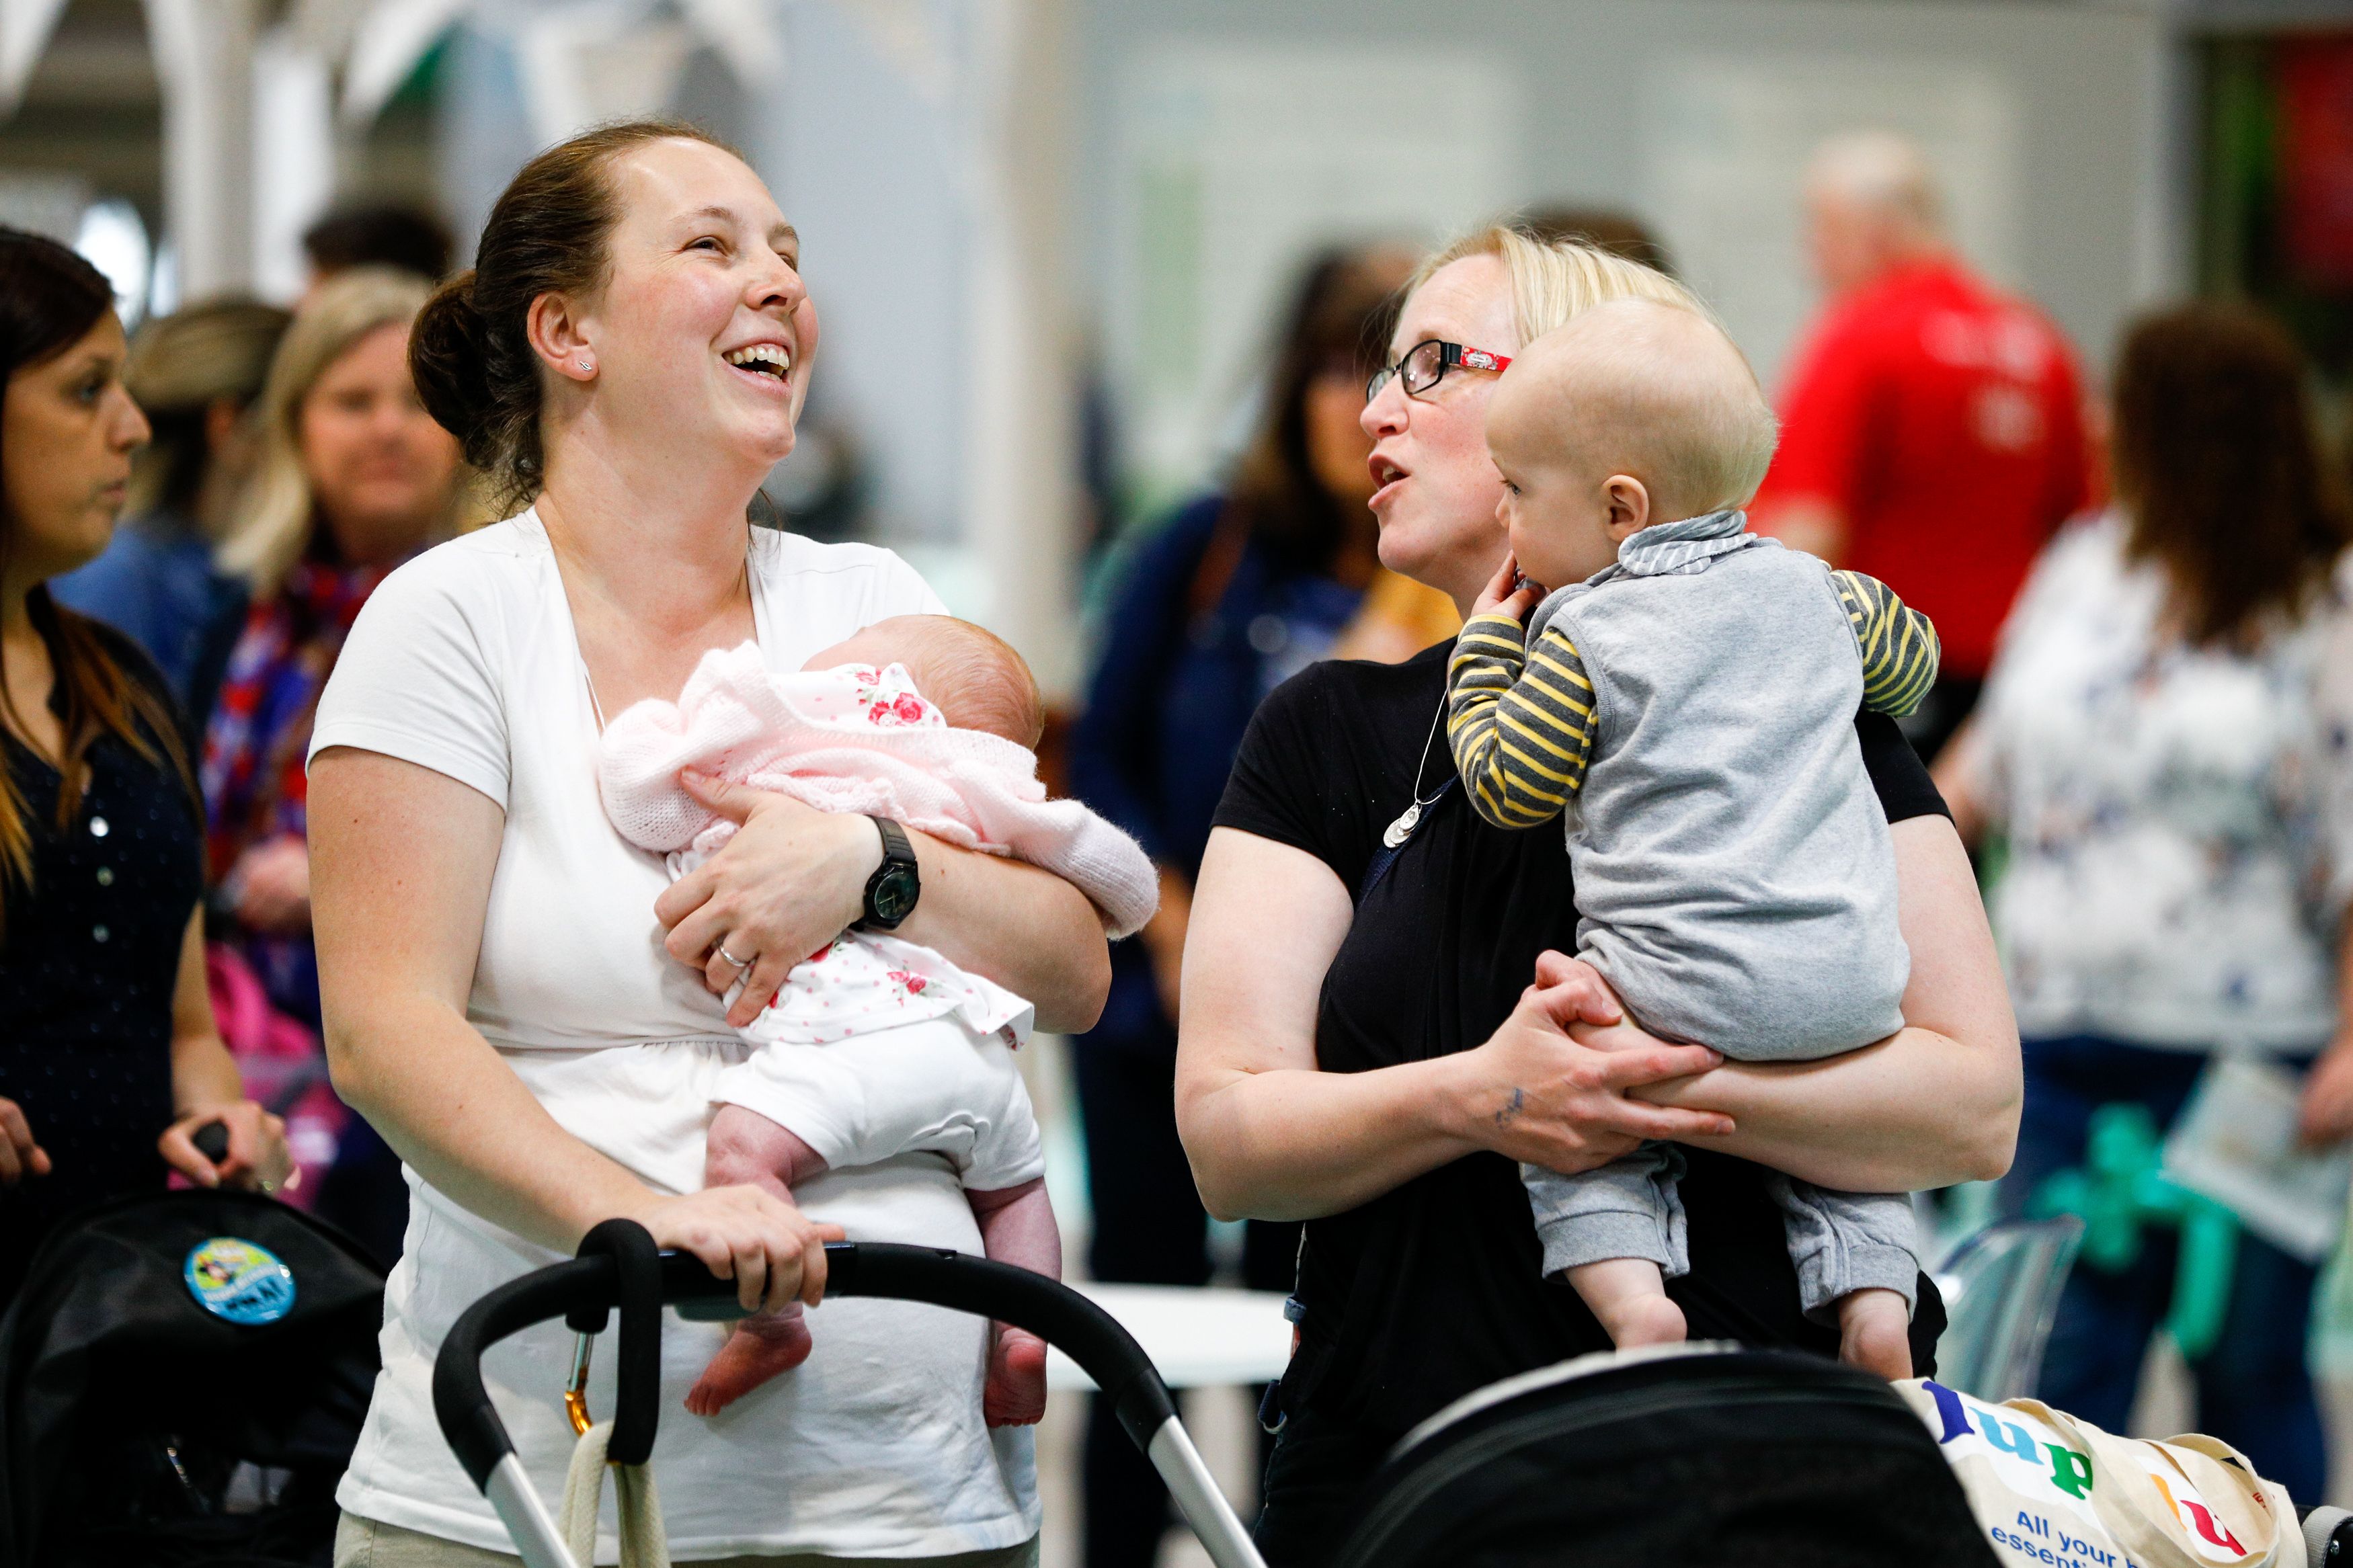 Journey into parenthood at The Baby Show, the UK’s leading and largest event for new and expectant parents, ExCeL London, 4th – 6th March 2022